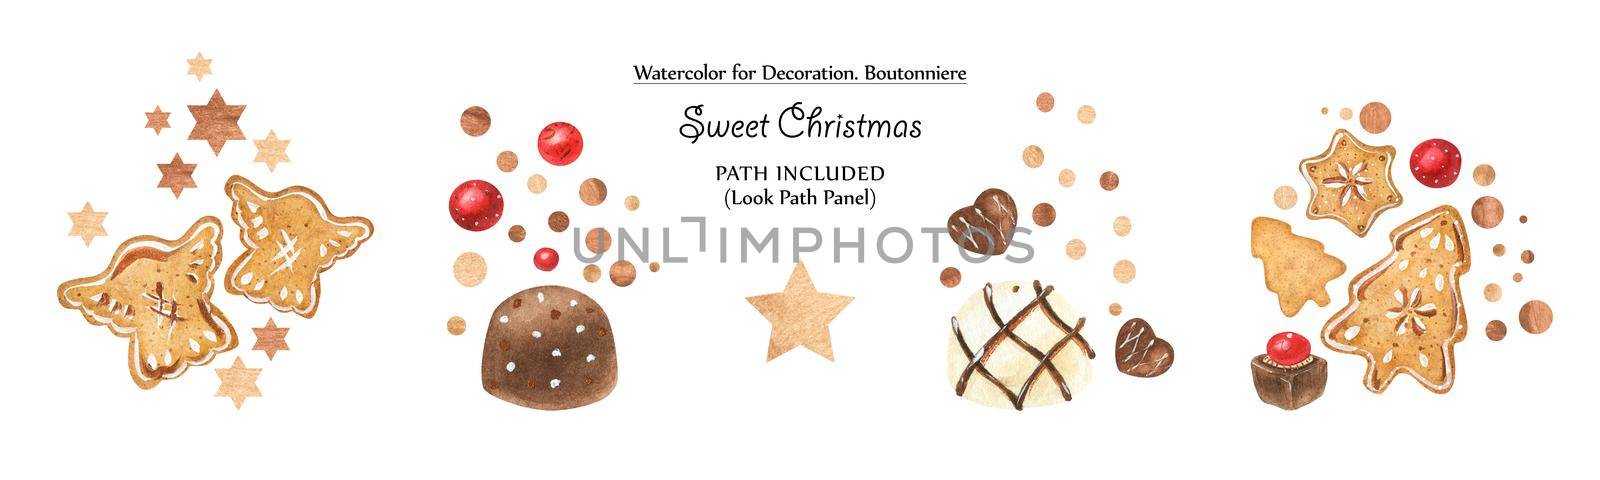 Set of sweet vignettes with gingerbreads and chocolates. Watercolor illustration, path included